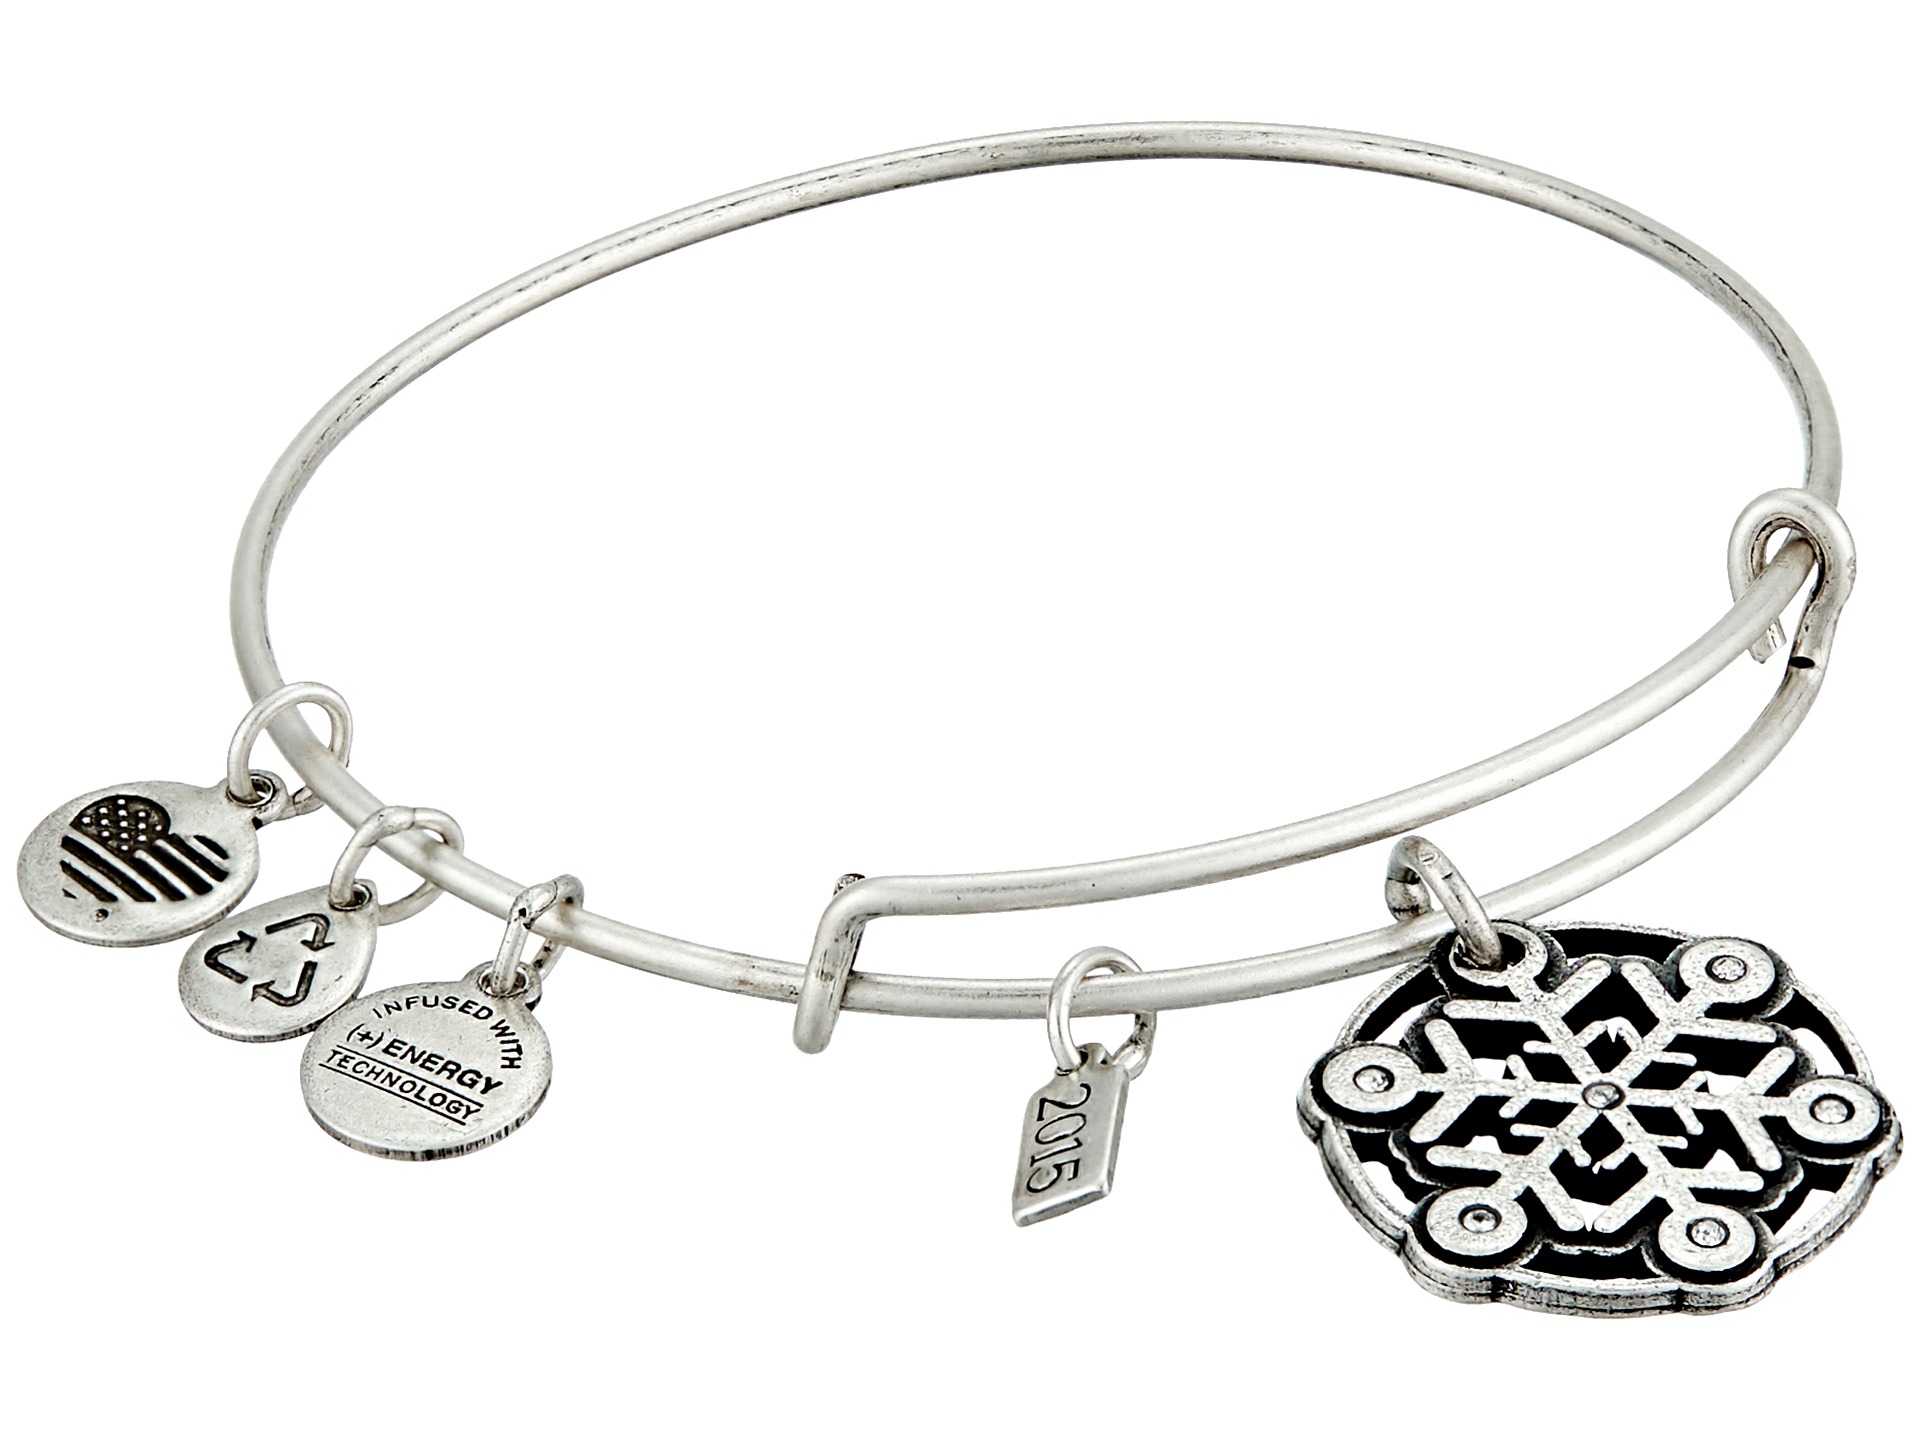 Alex and Ani Limited Edition 2015 Snowflake Bracelet at Zappos.com